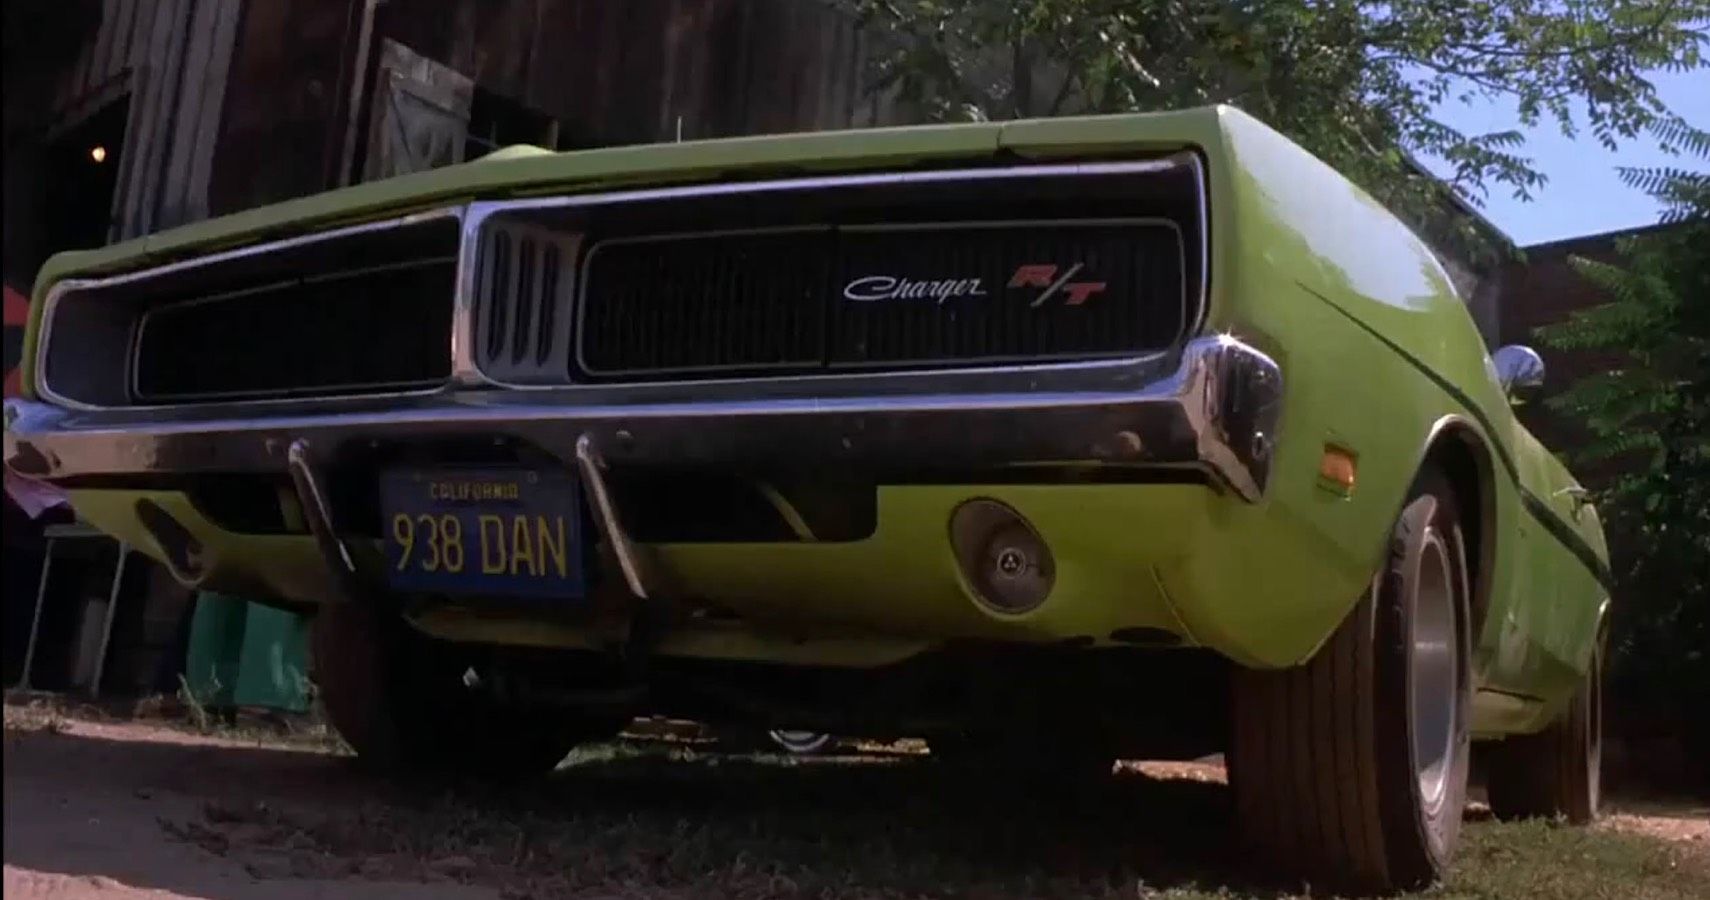 1969 Dodge Charger from Dirty Mary, Crazy Larry